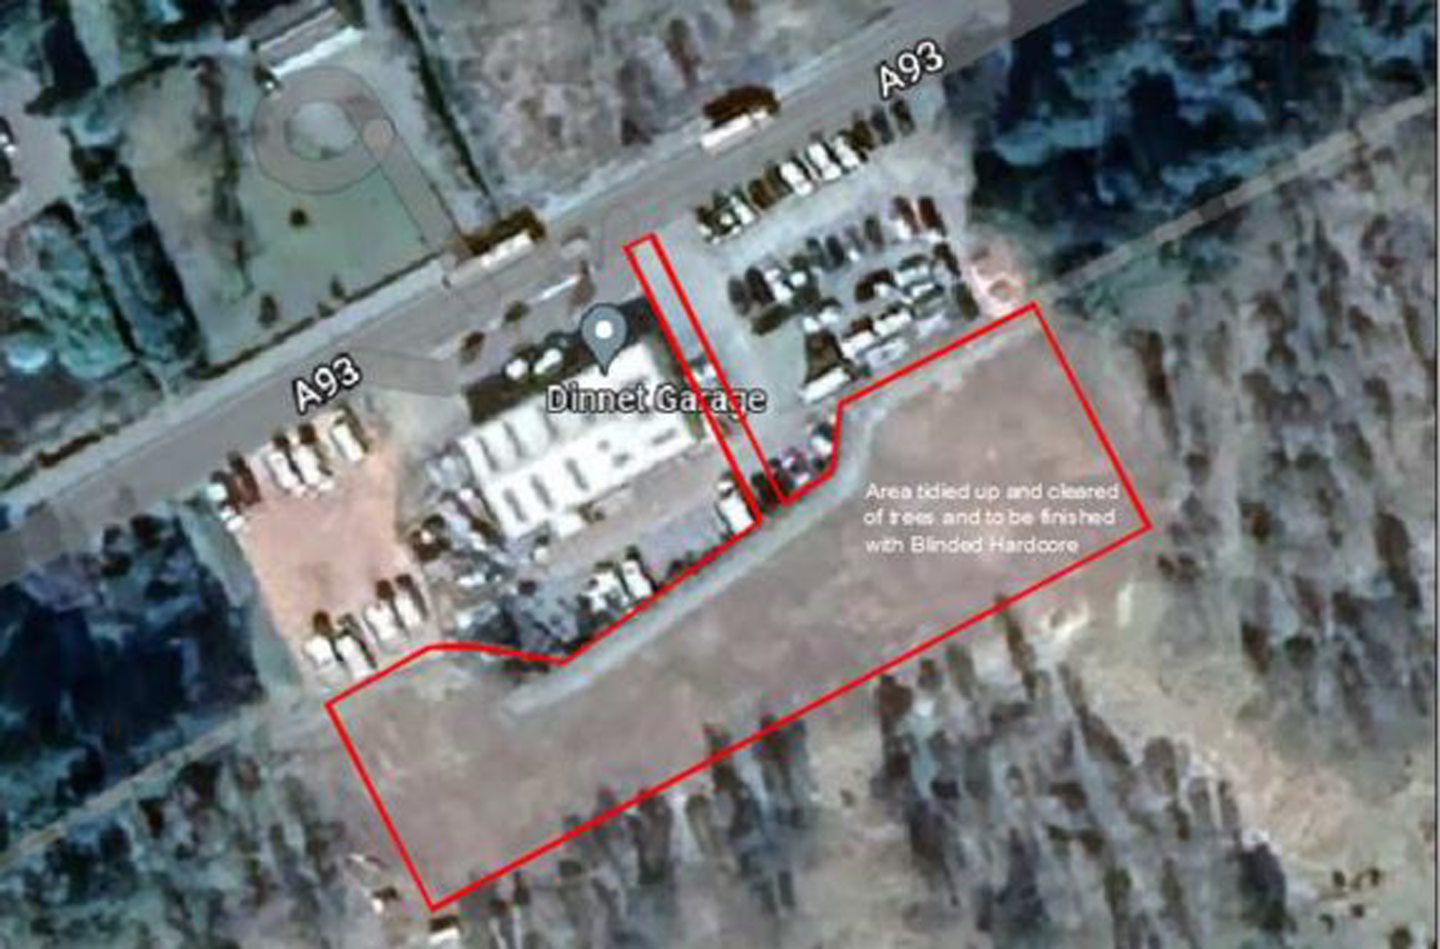 An aerial view of the site, with a red line indicating how the path would look